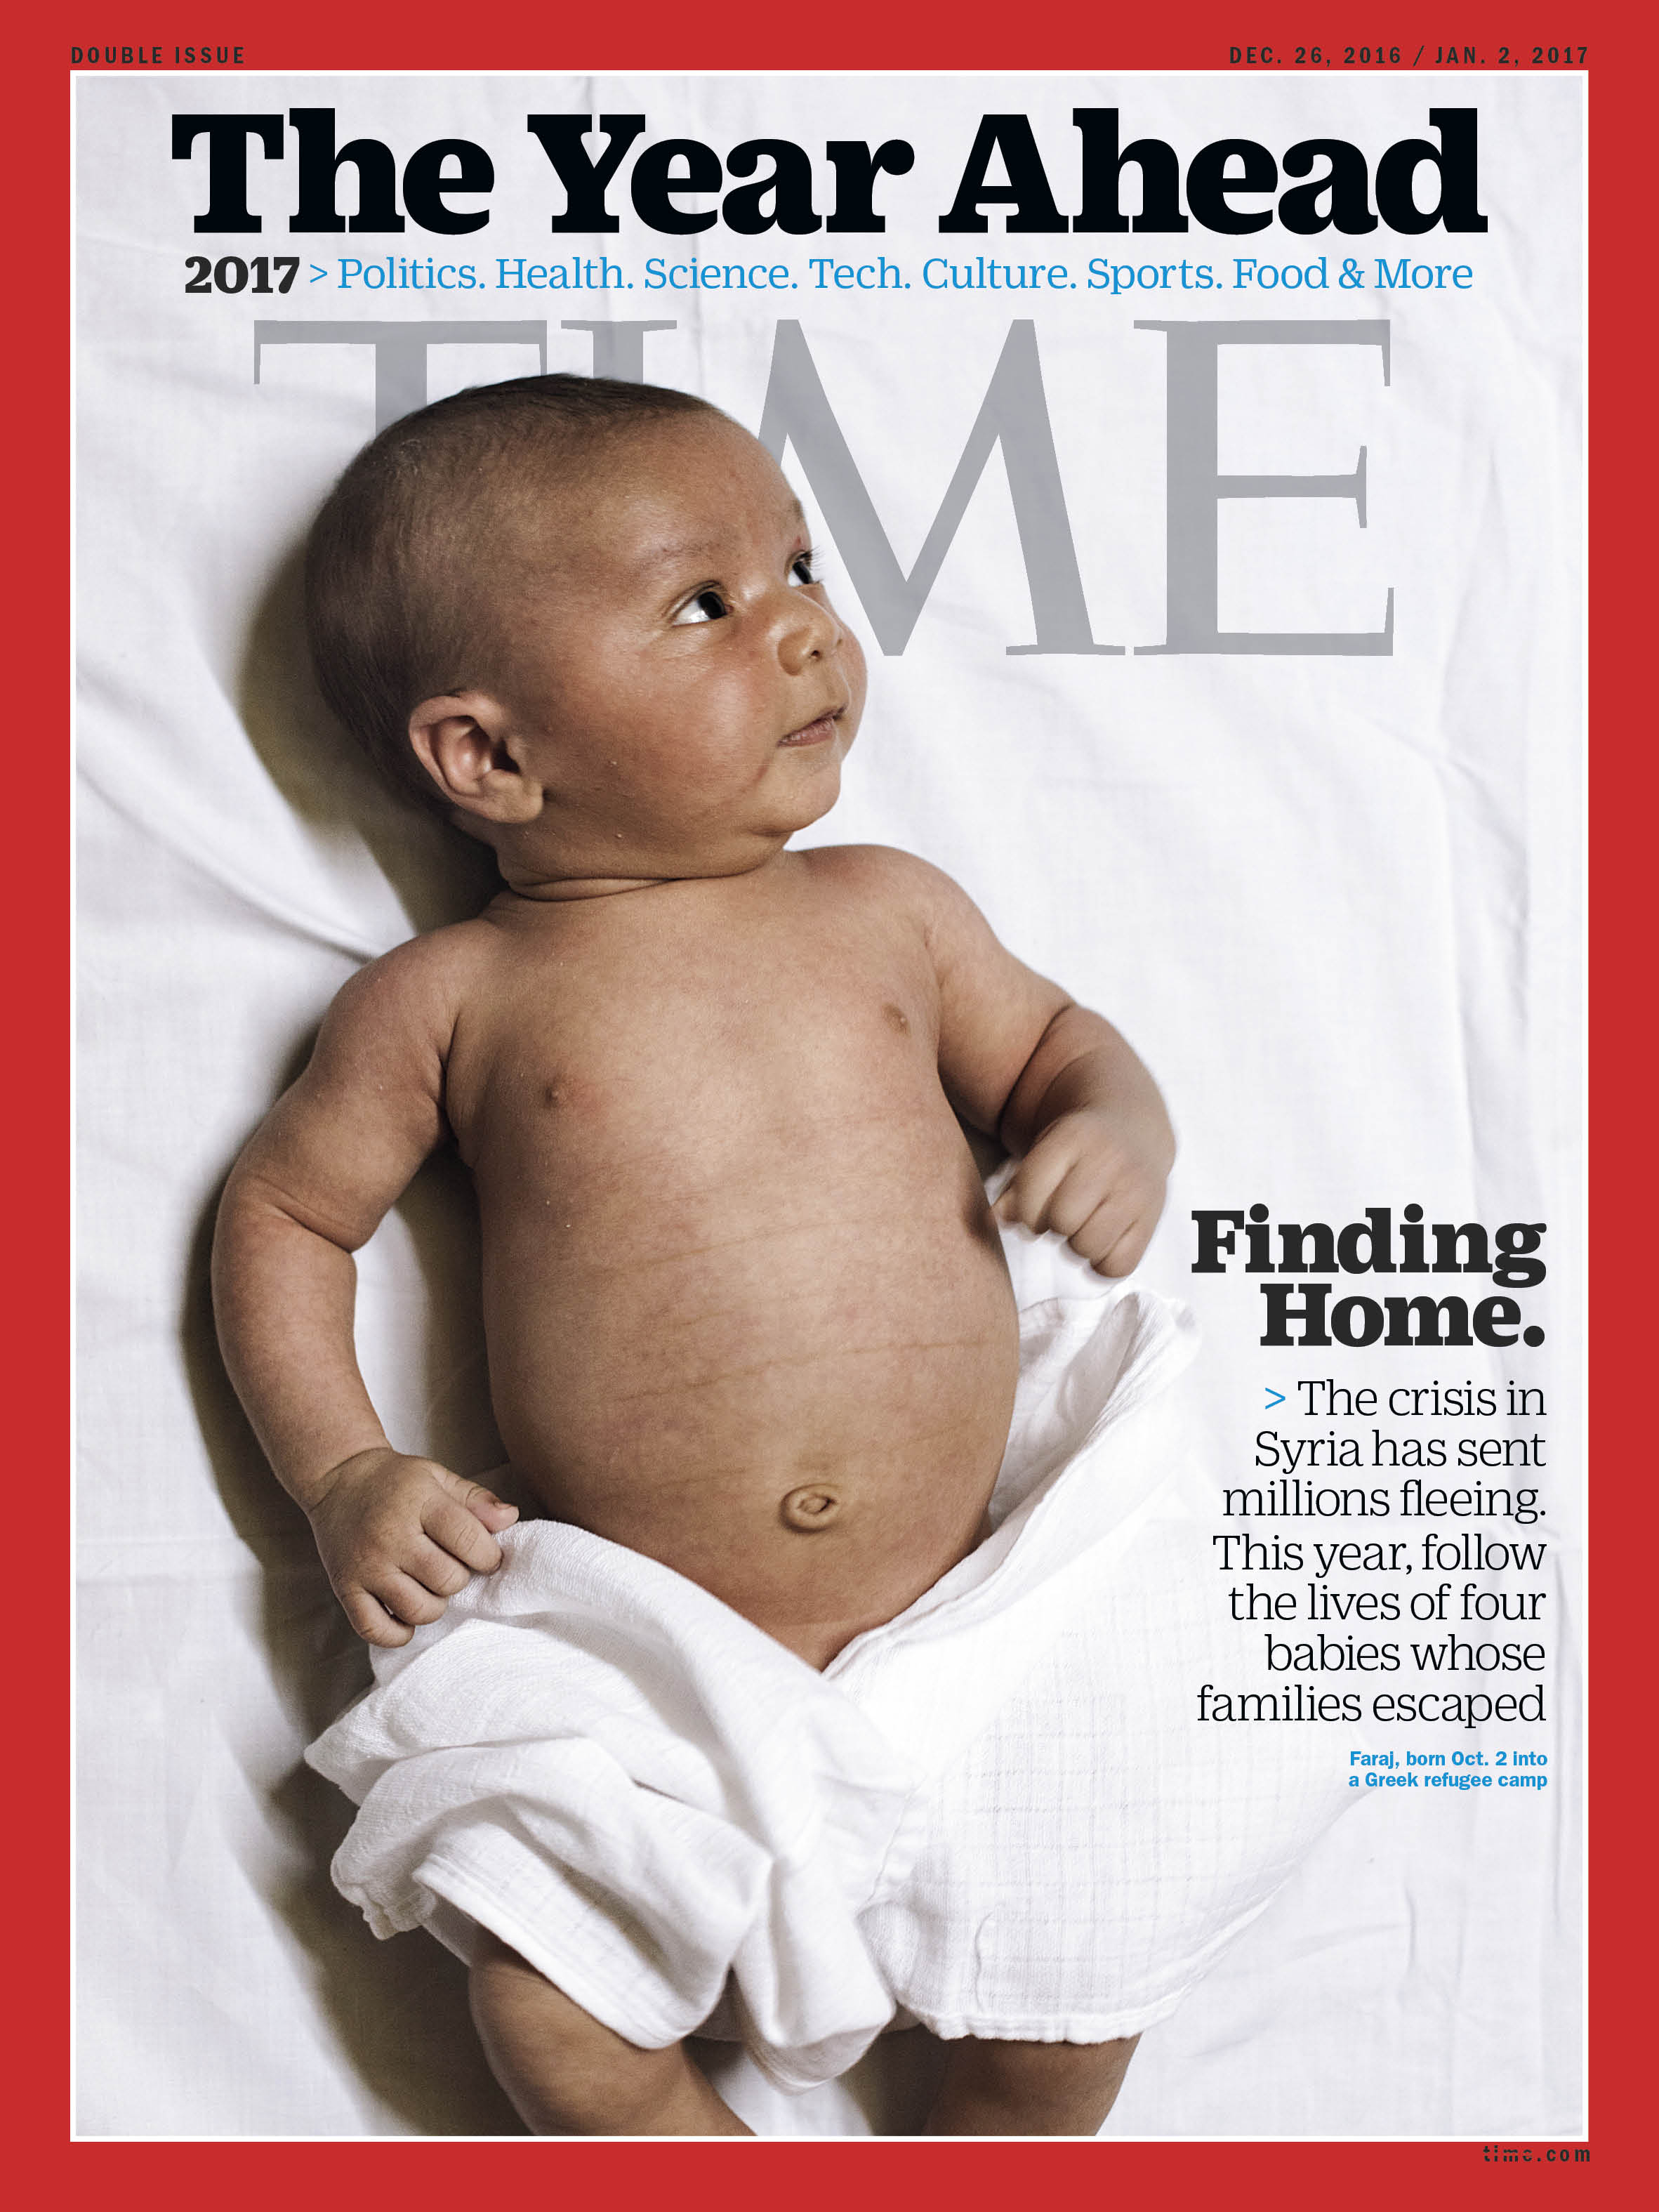 The Year Ahead Refugee Baby cover